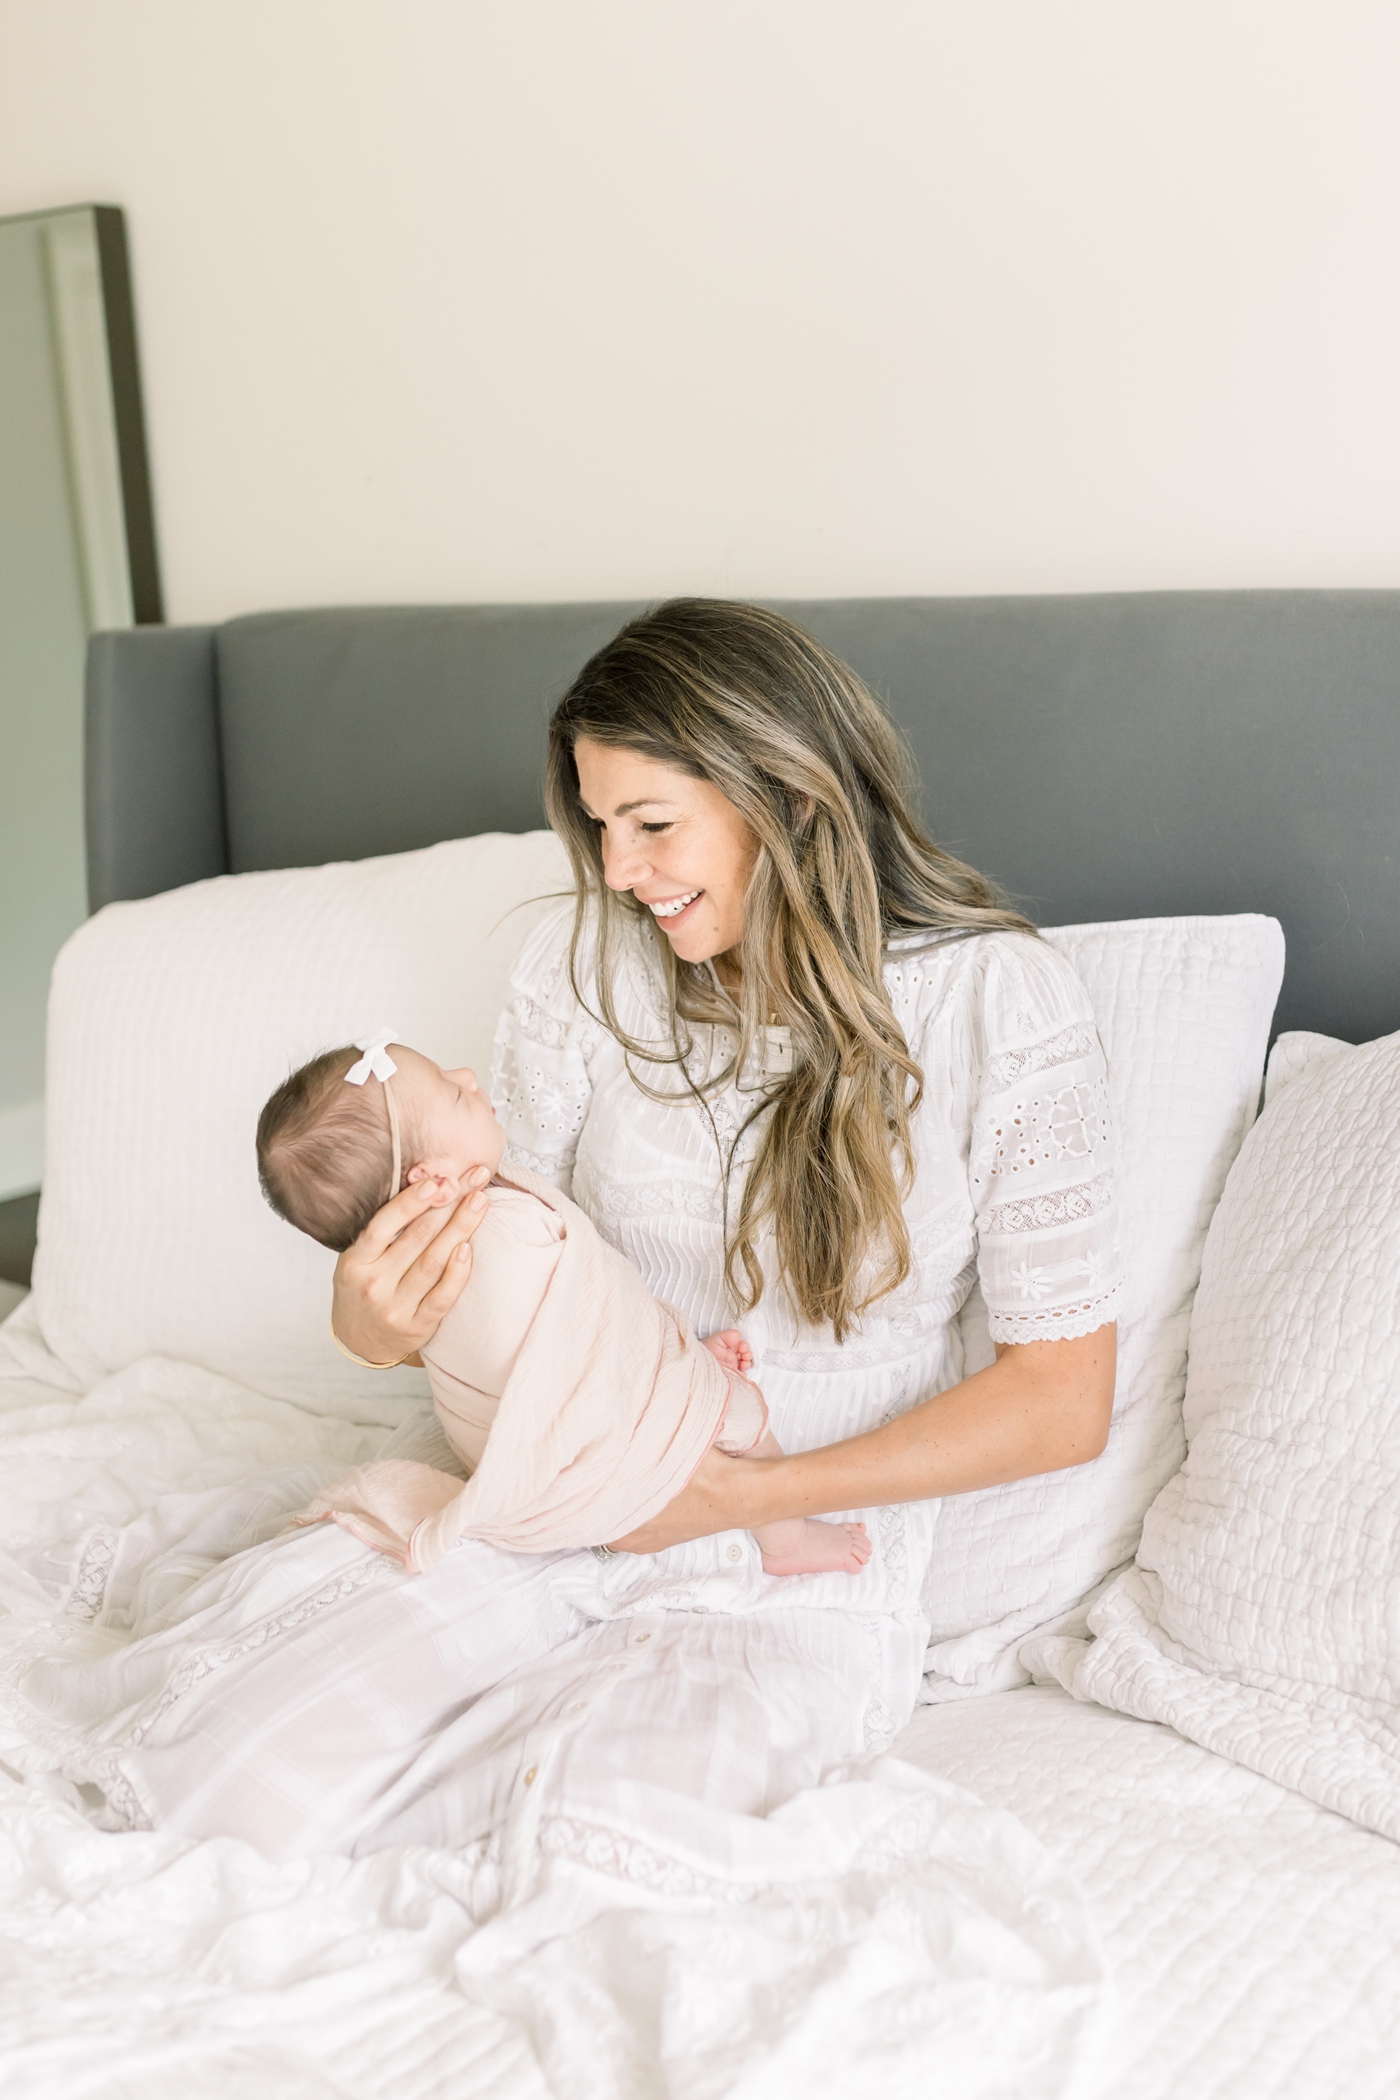 Mom holding baby girl in light pink swaddle on bed during newborn session. Photo by Caitlyn Motycka Photography.